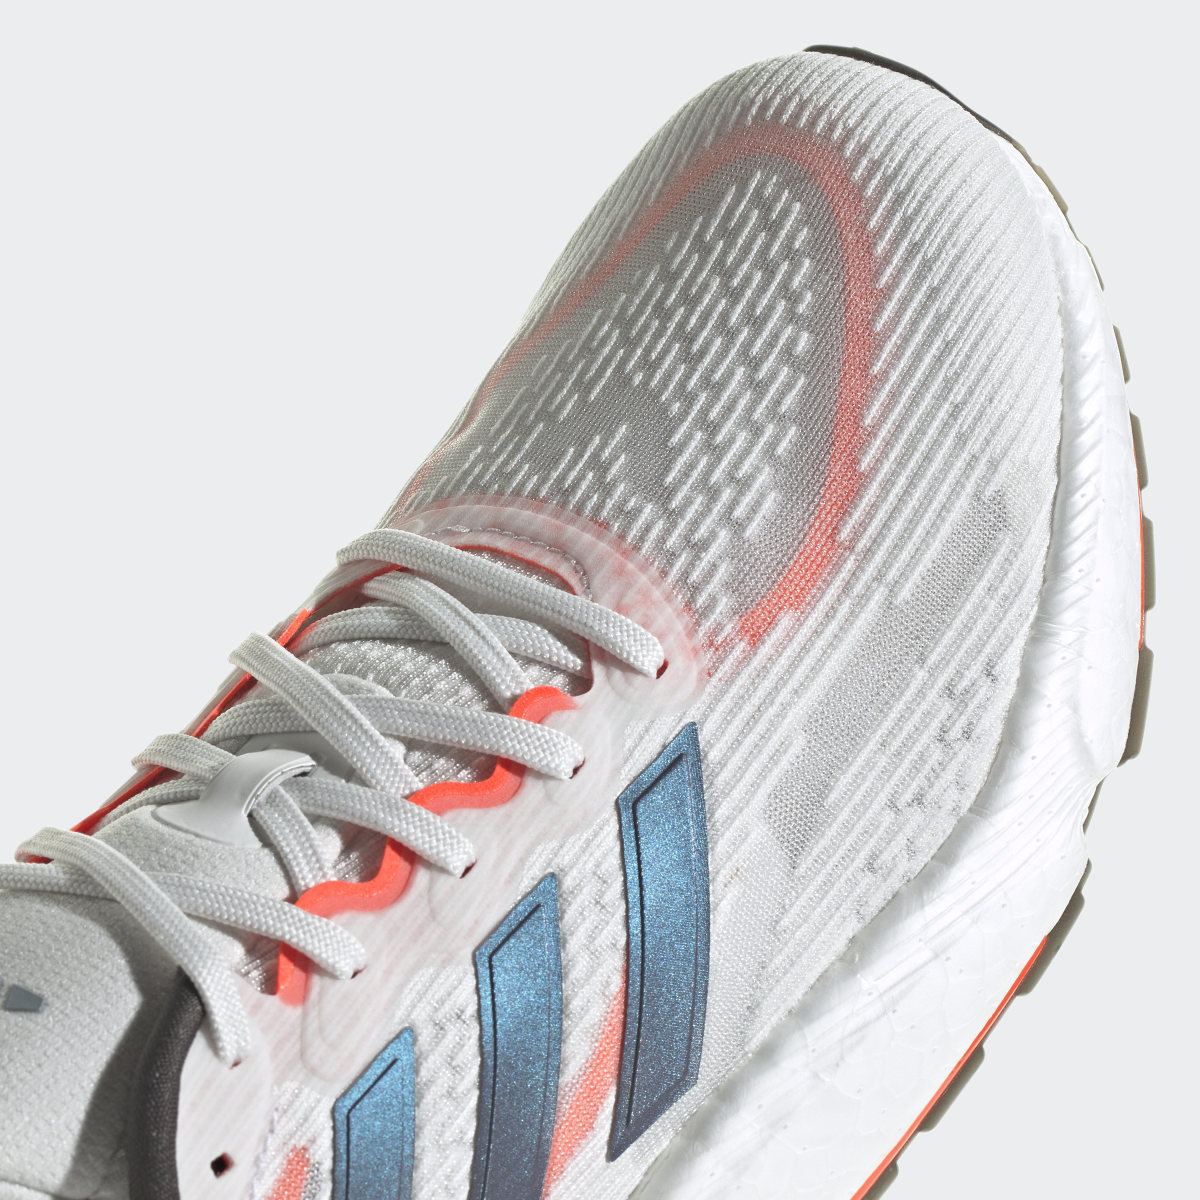 Adidas Solarboost 5 Shoes. 12